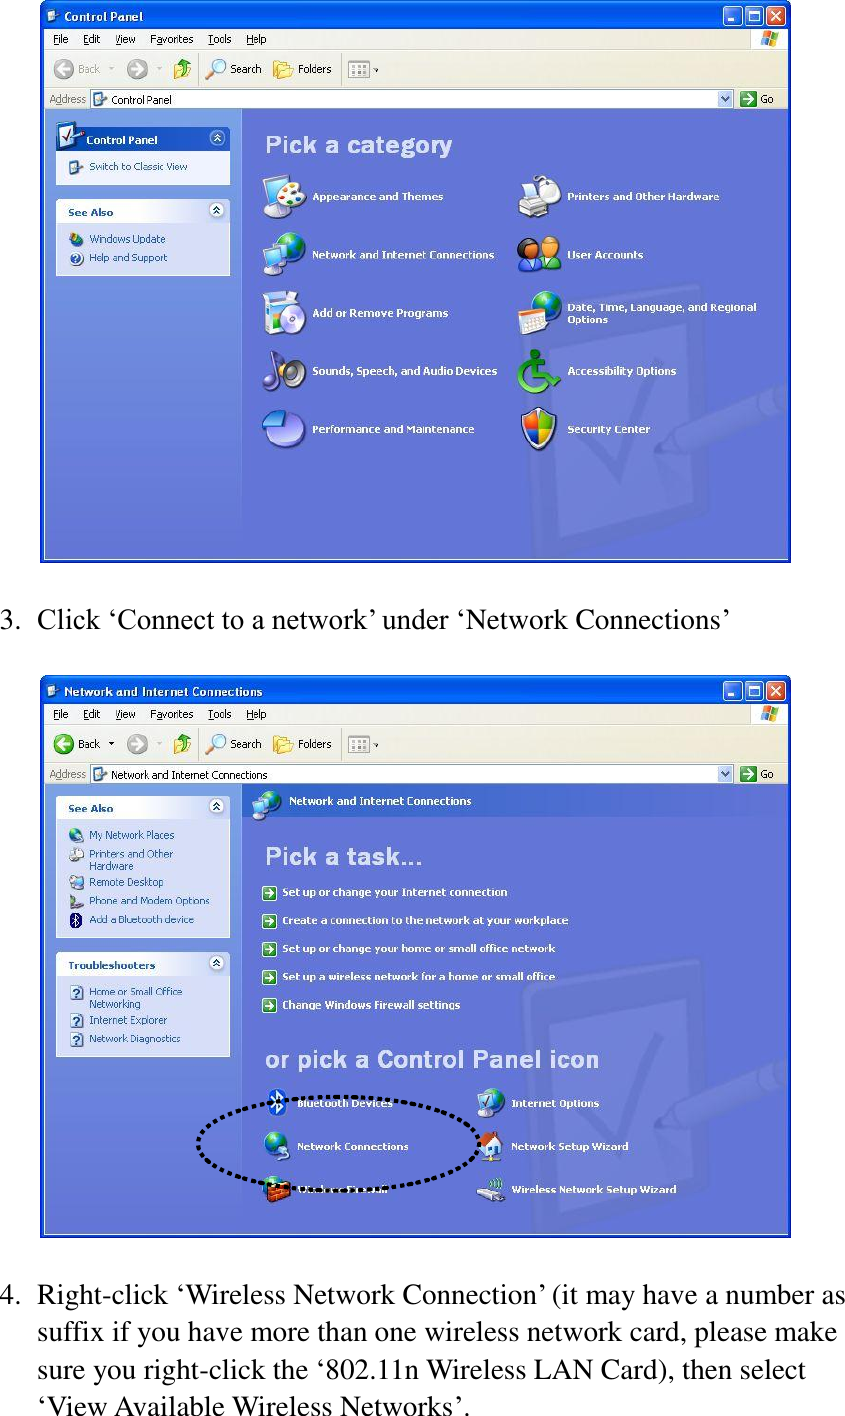   3. Click ‘Connect to a network’ under ‘Network Connections’    4. Right-click ‘Wireless Network Connection’ (it may have a number as suffix if you have more than one wireless network card, please make sure you right-click the ‘802.11n Wireless LAN Card), then select ‘View Available Wireless Networks’. 